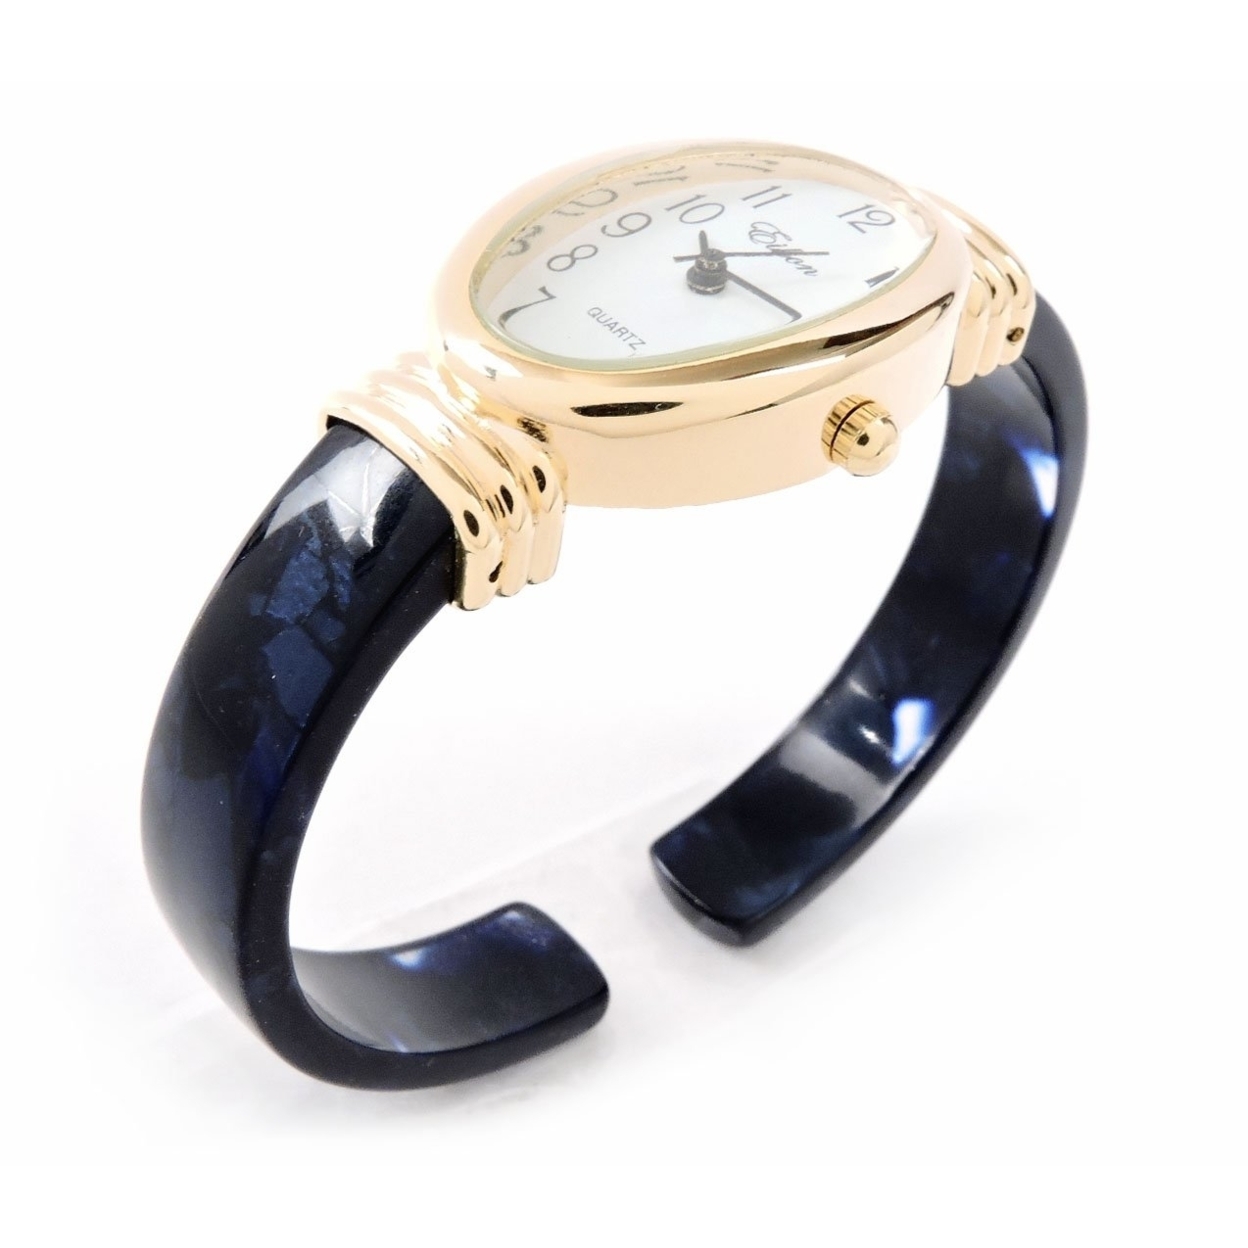 Tortoise Blue Acrylic Band With Gold Oval Case Women's Bangle Cuff WATCH